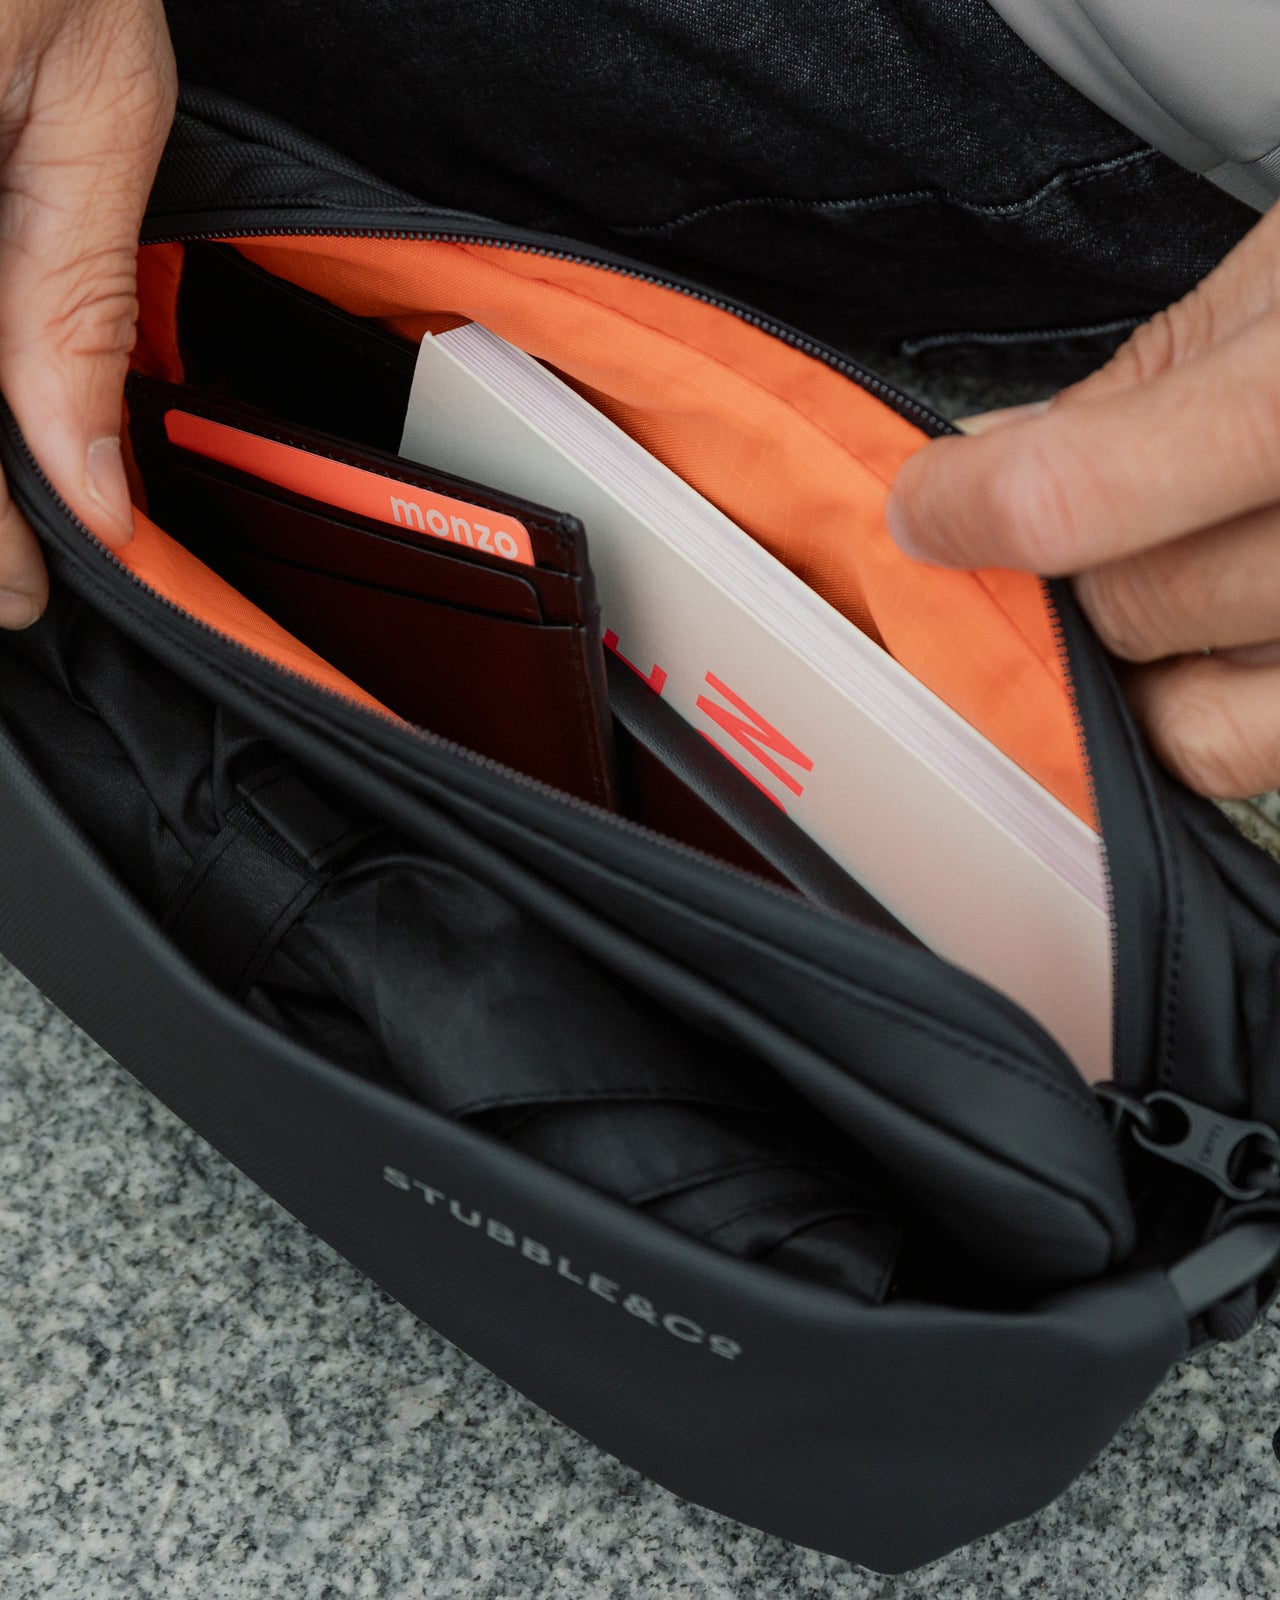 an interior shot of the All Black Crossbody bag showing the orange lining of the bags and the items inside the bag which  are a card holder, a book and an umbrella